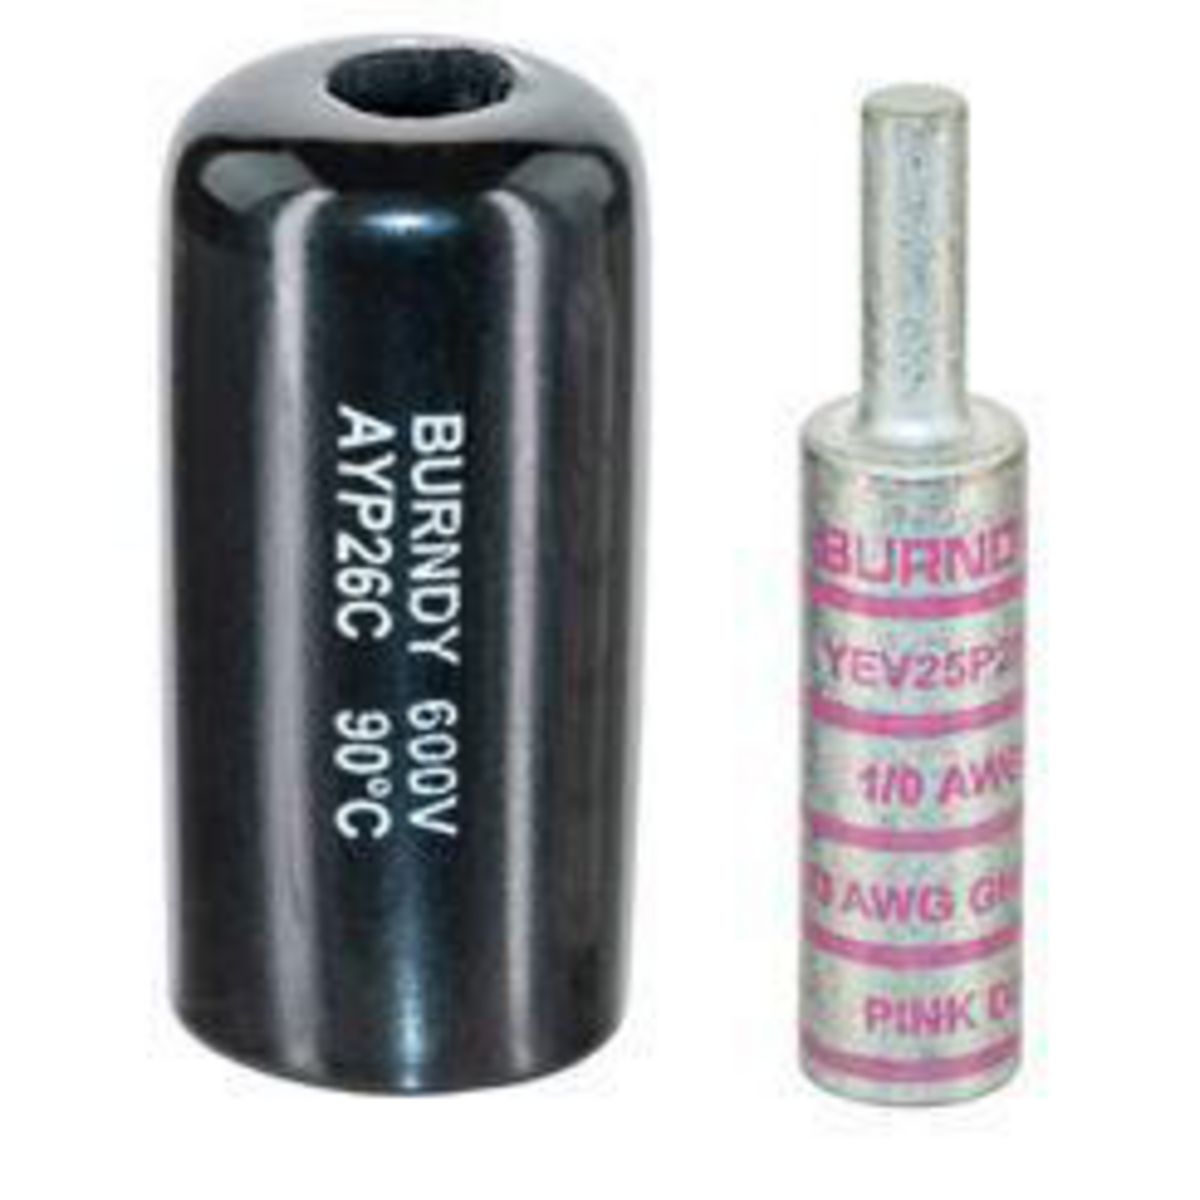 1/0 AWG CU TO 2 AWG SOLID PIN TERMINAL